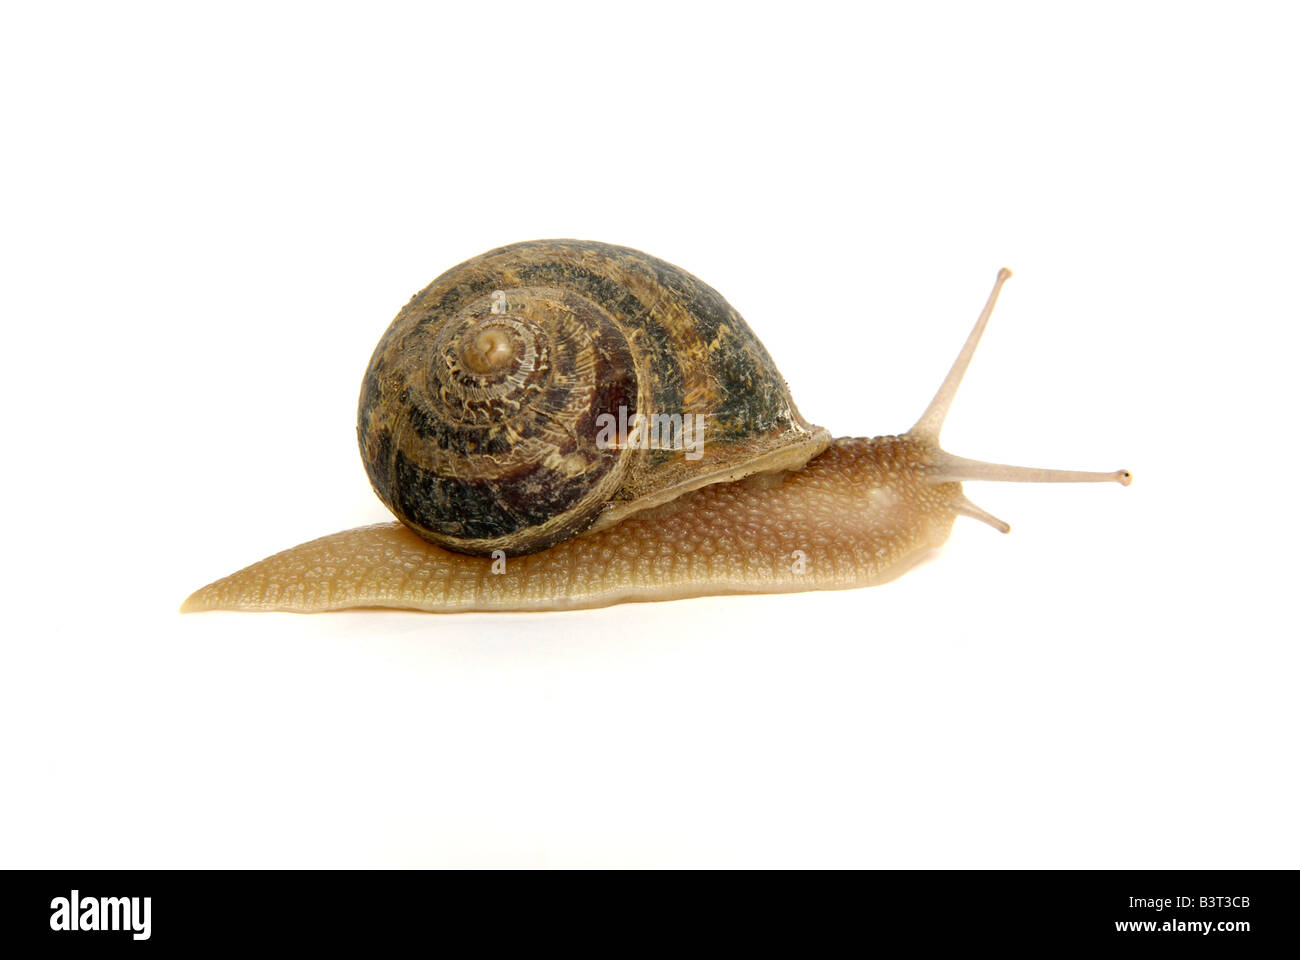 Snail on a background white in studio. Stock Photo